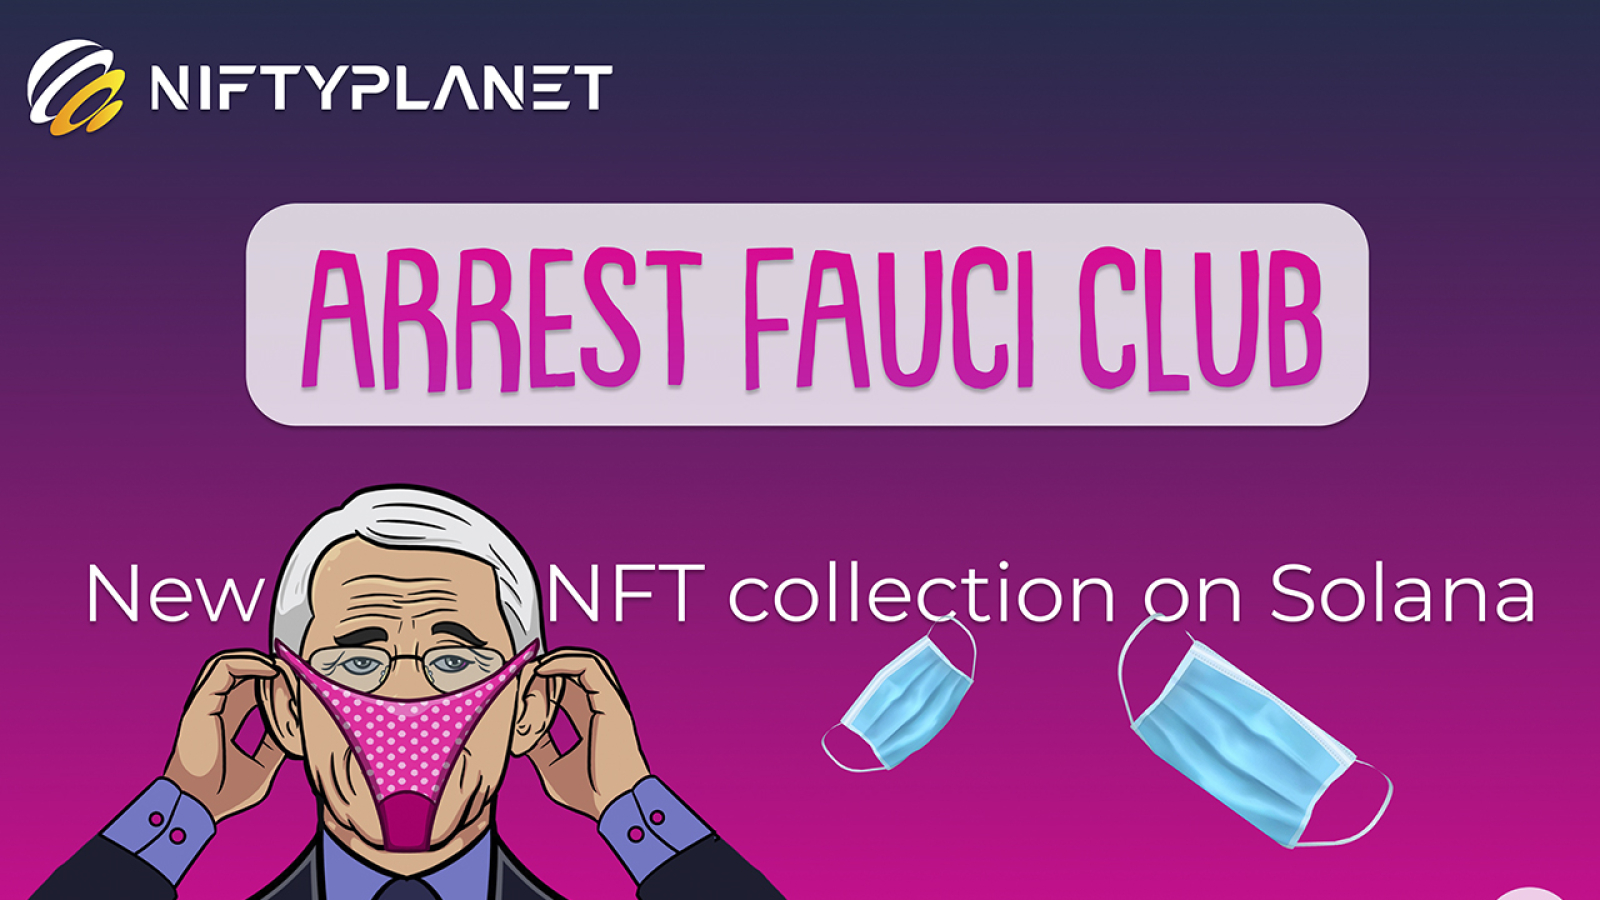 NiftyPlanet calls for the arrest of Anthony Fauci with their new hilarious NFT collection